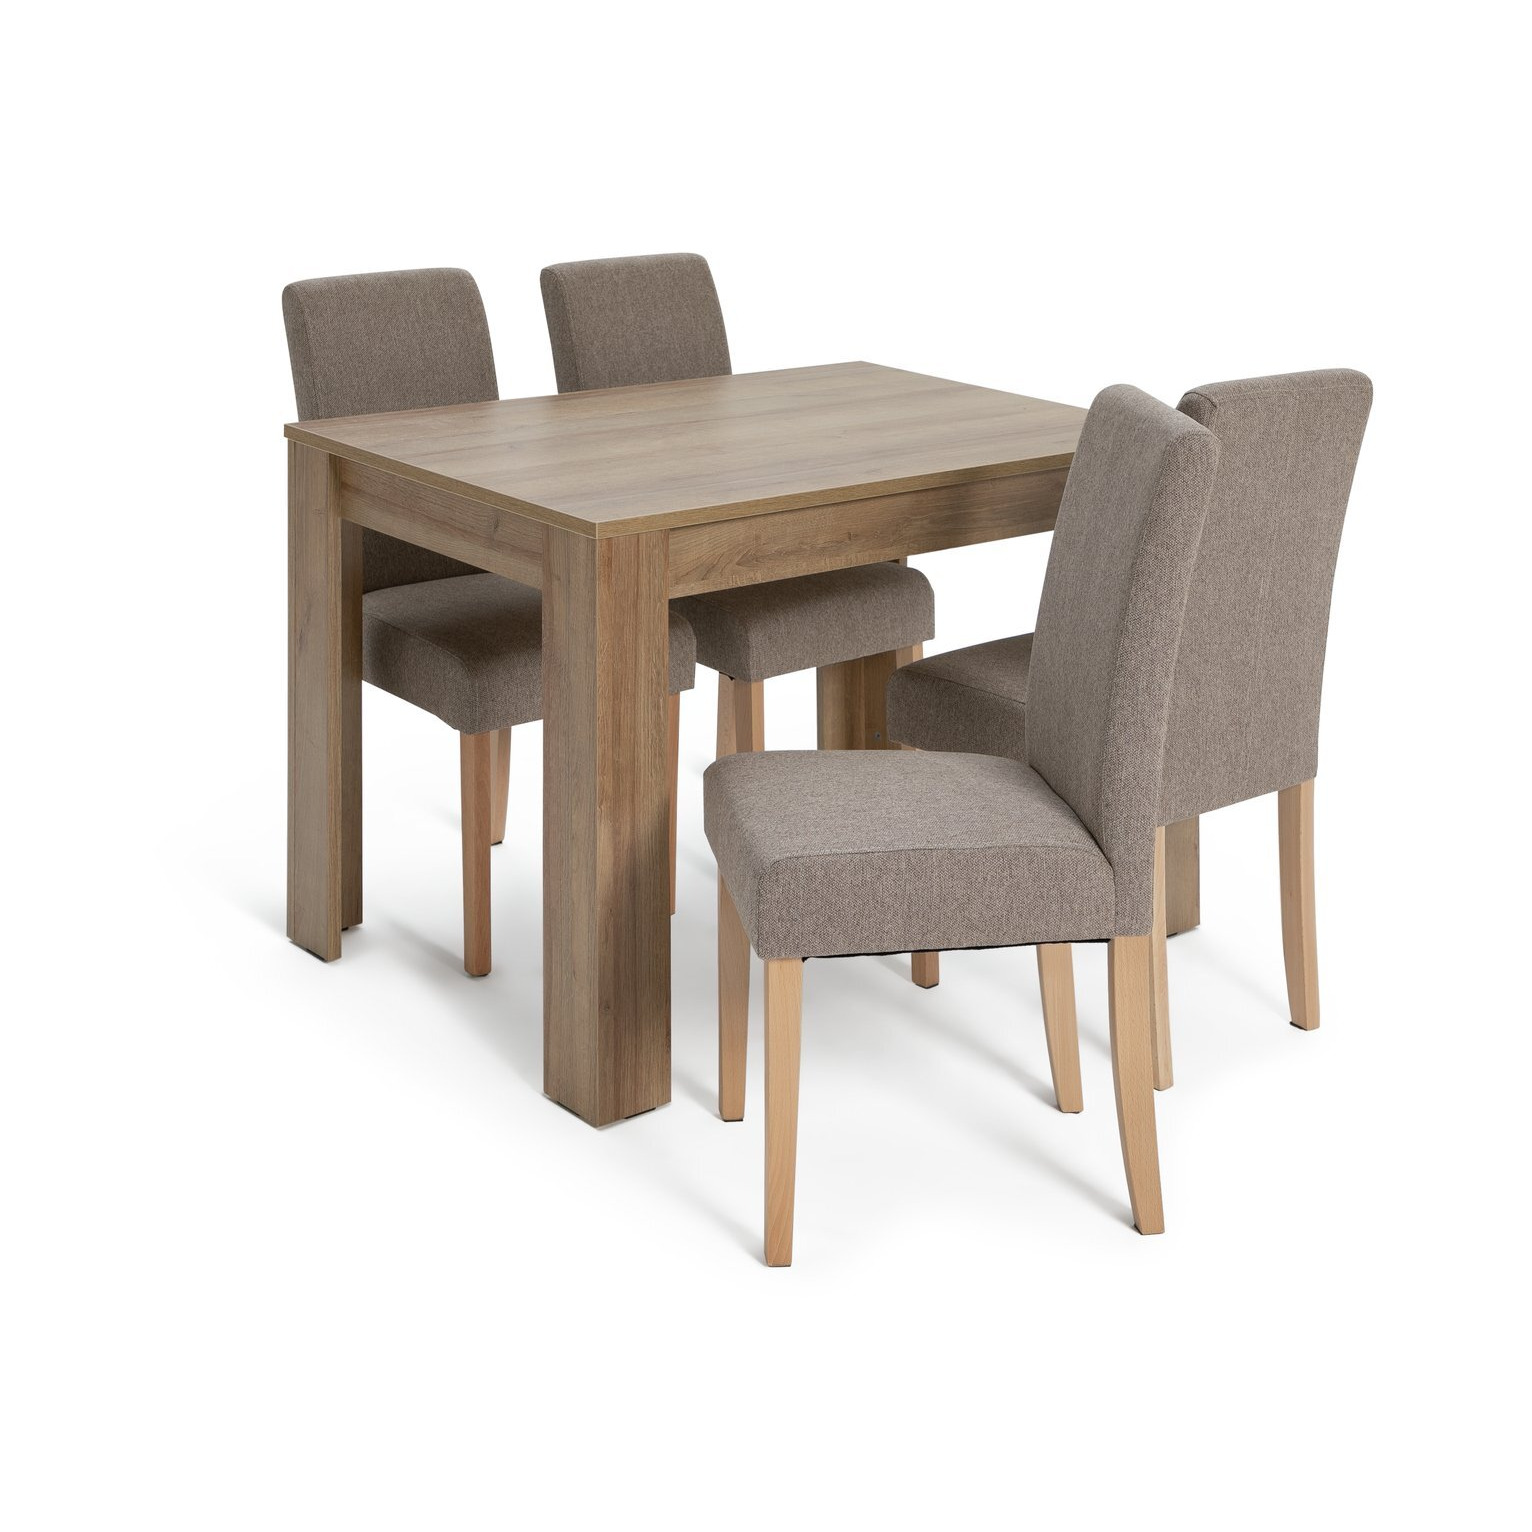 Argos Home Miami Wood Effect Dining Table & 4 Brown Chairs - image 1